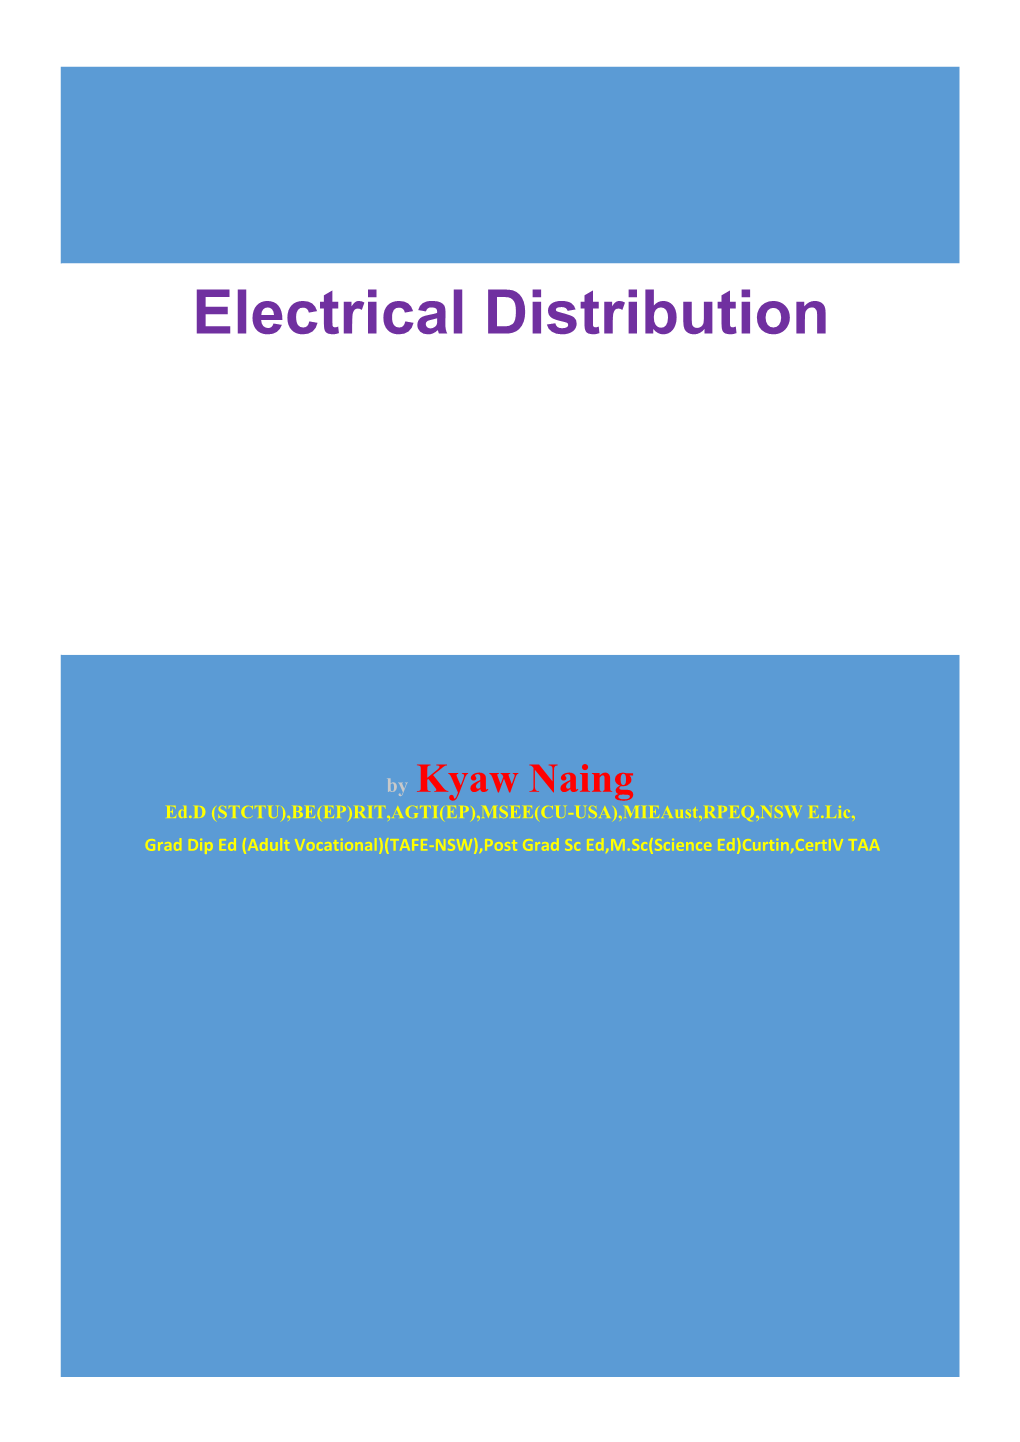 The Major Electrical Items Encountered in Most Types of Industrial Commercial Plants Are Listed Below